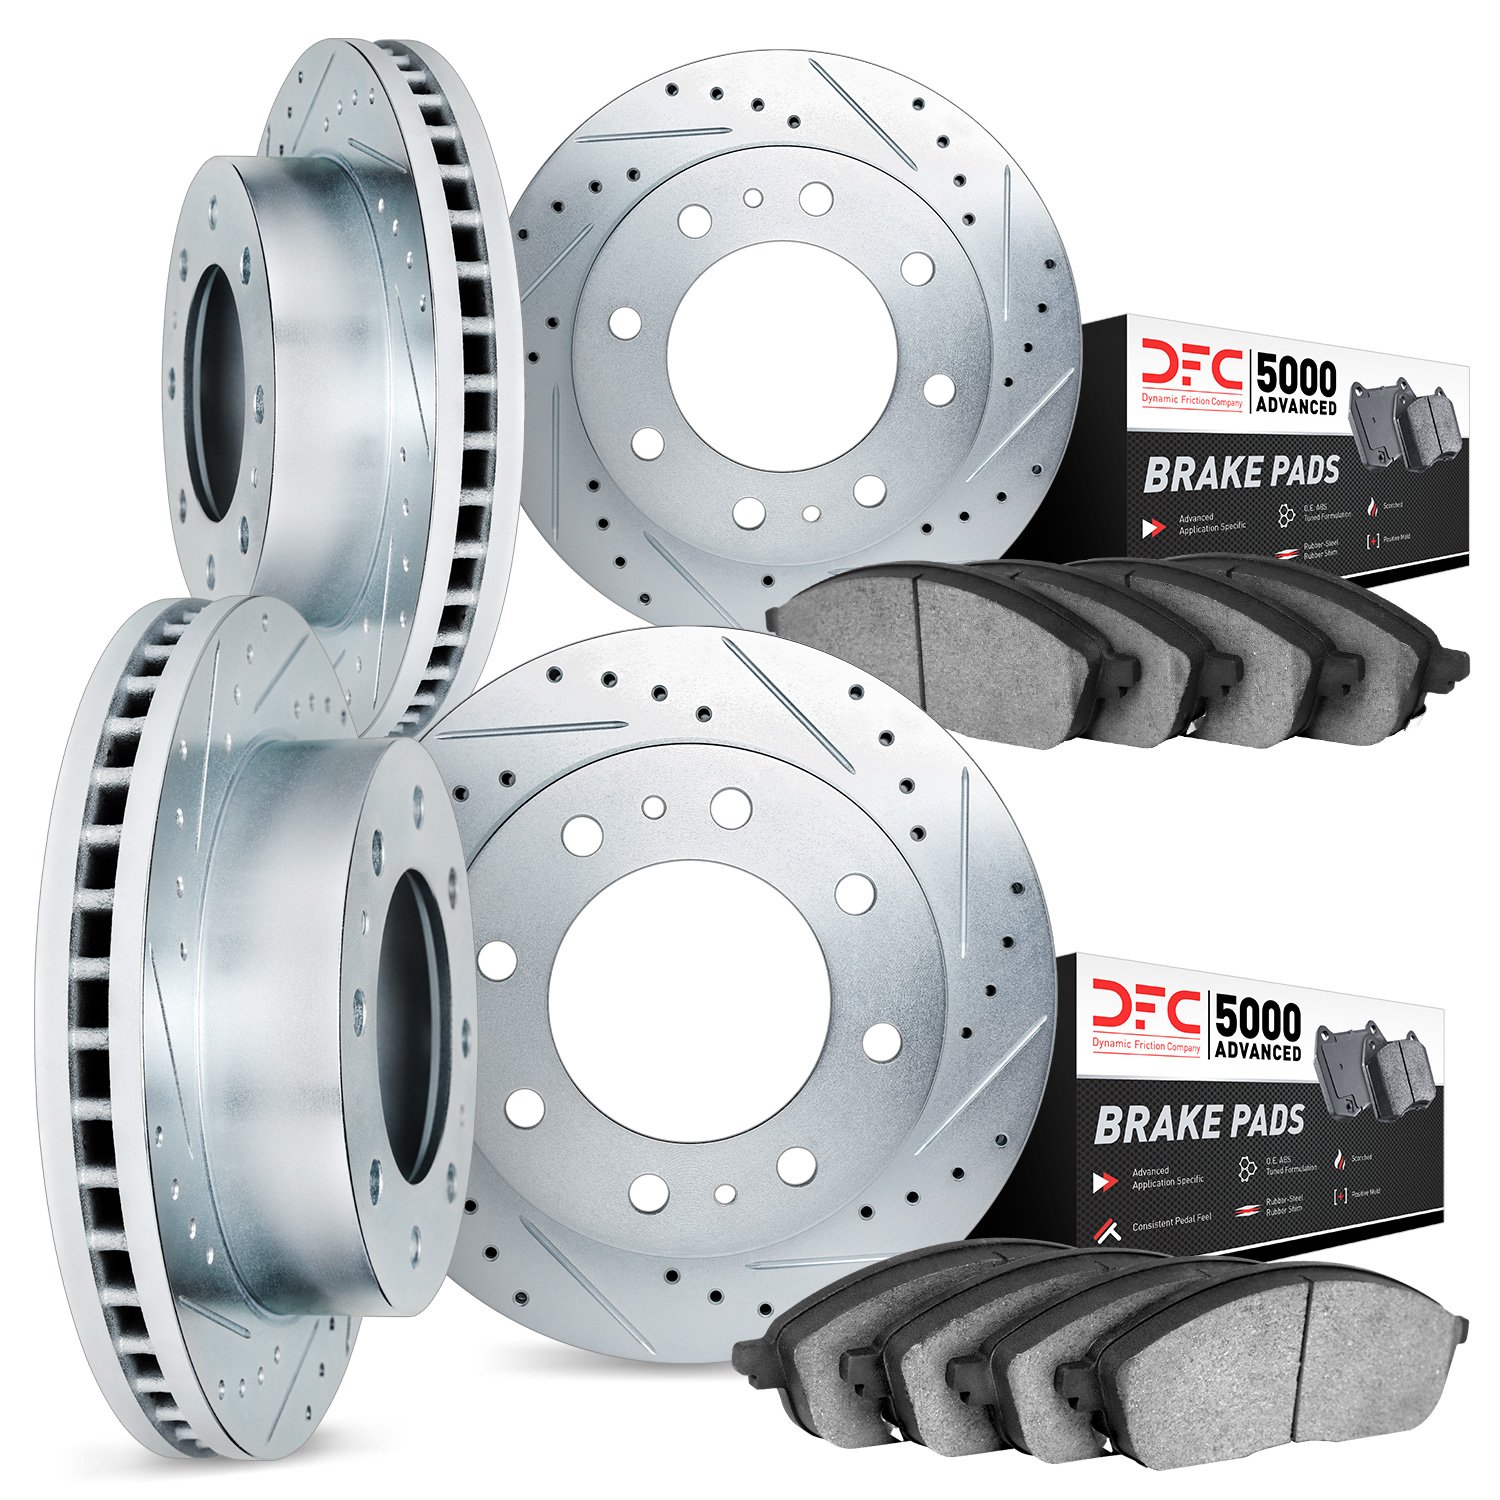 7504-40249 Drilled/Slotted Brake Rotors w/5000 Advanced Brake Pads Kit [Silver], Fits Select Mopar, Position: Front and Rear